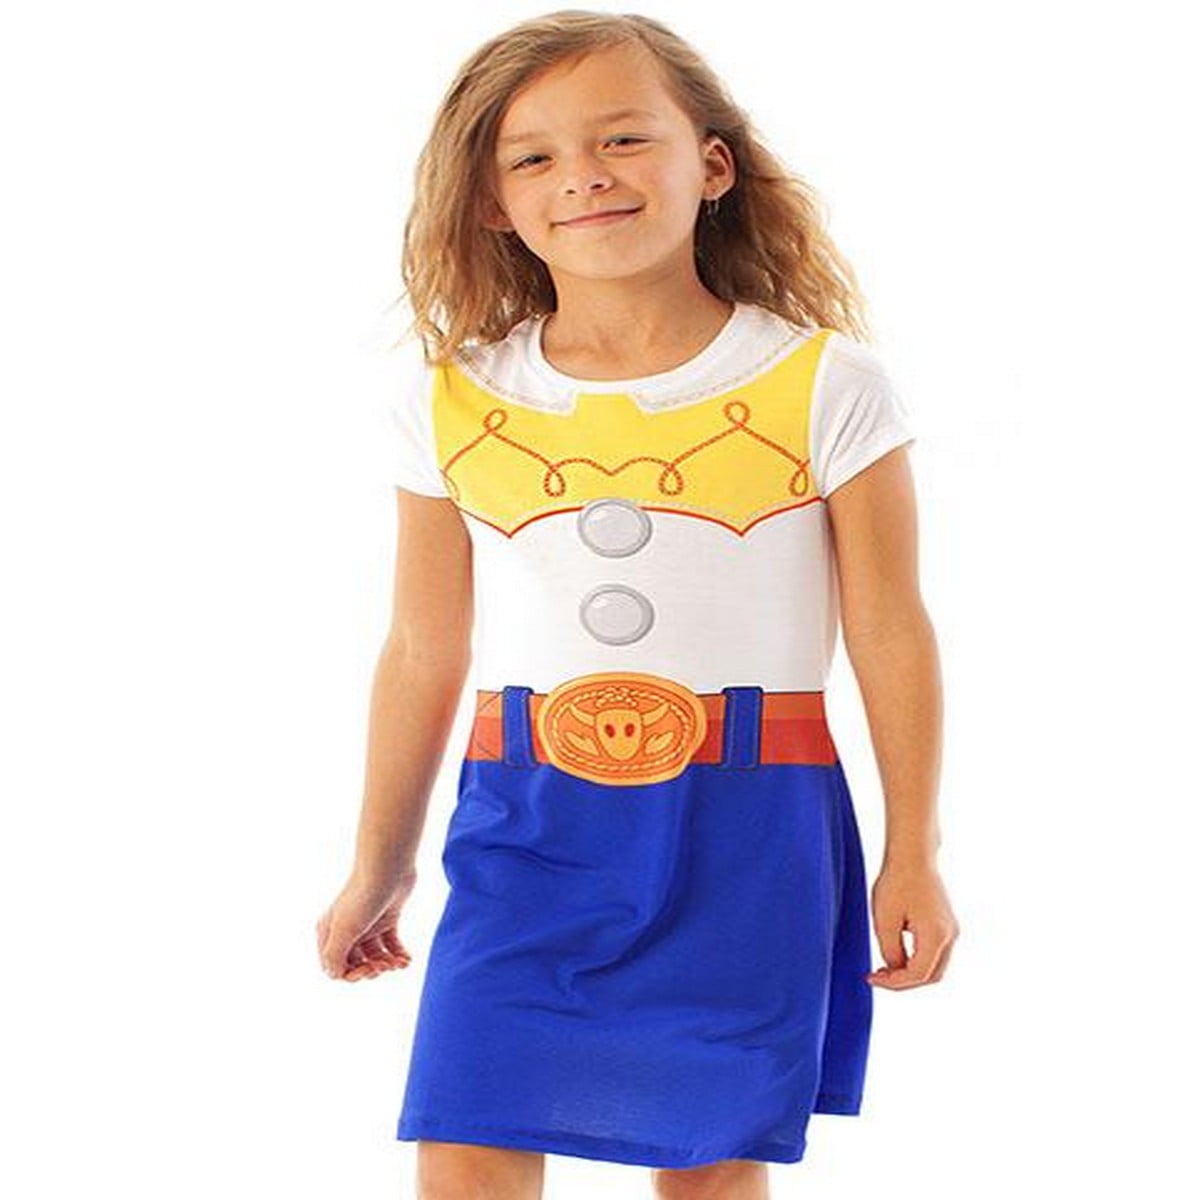 George Toy Story 4 Jessie Girls Fancy Dress Costume Outfit & Hat 7-8 Years 